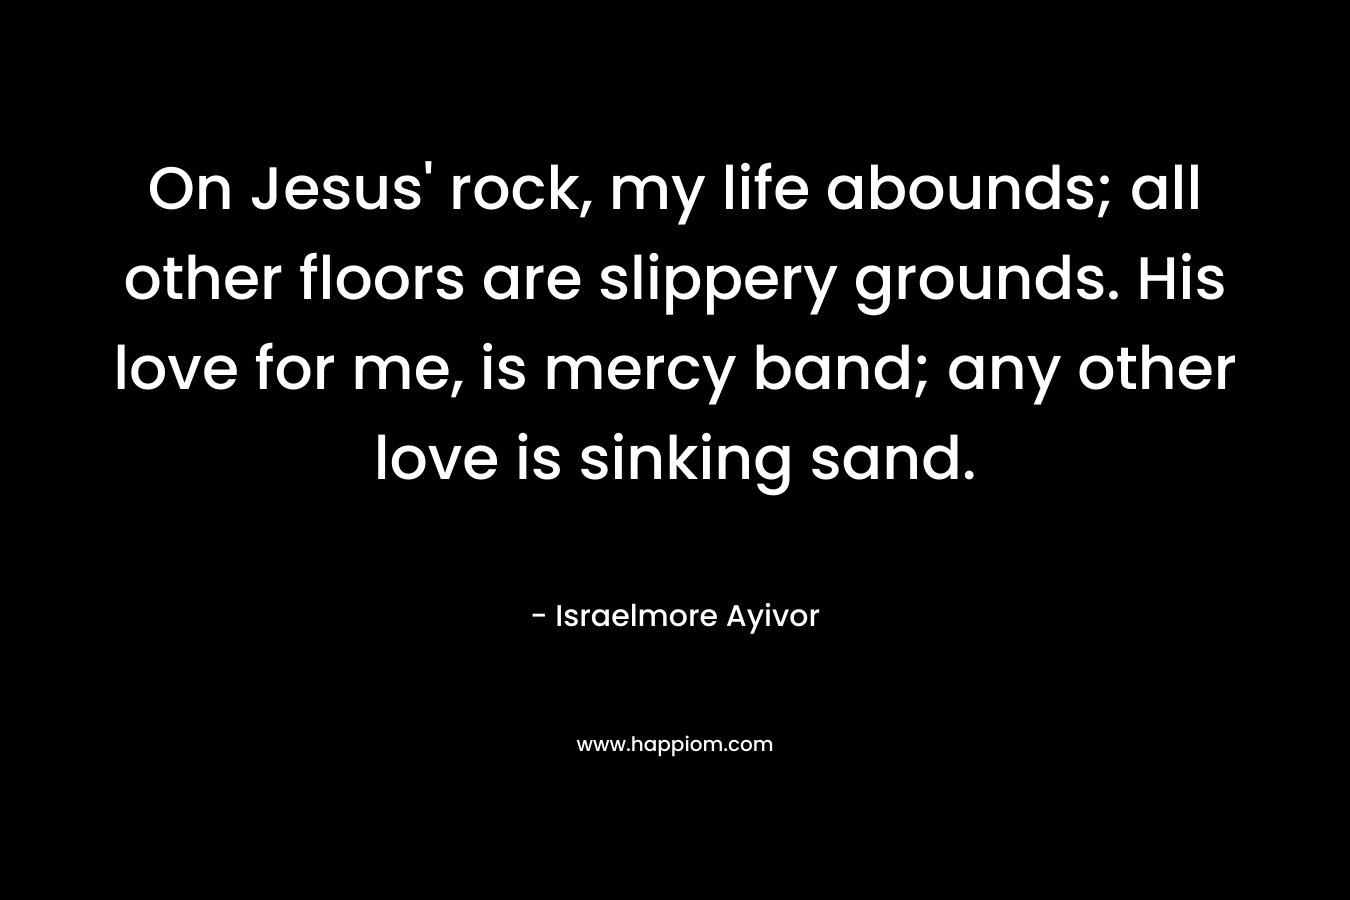 On Jesus’ rock, my life abounds; all other floors are slippery grounds. His love for me, is mercy band; any other love is sinking sand. – Israelmore Ayivor